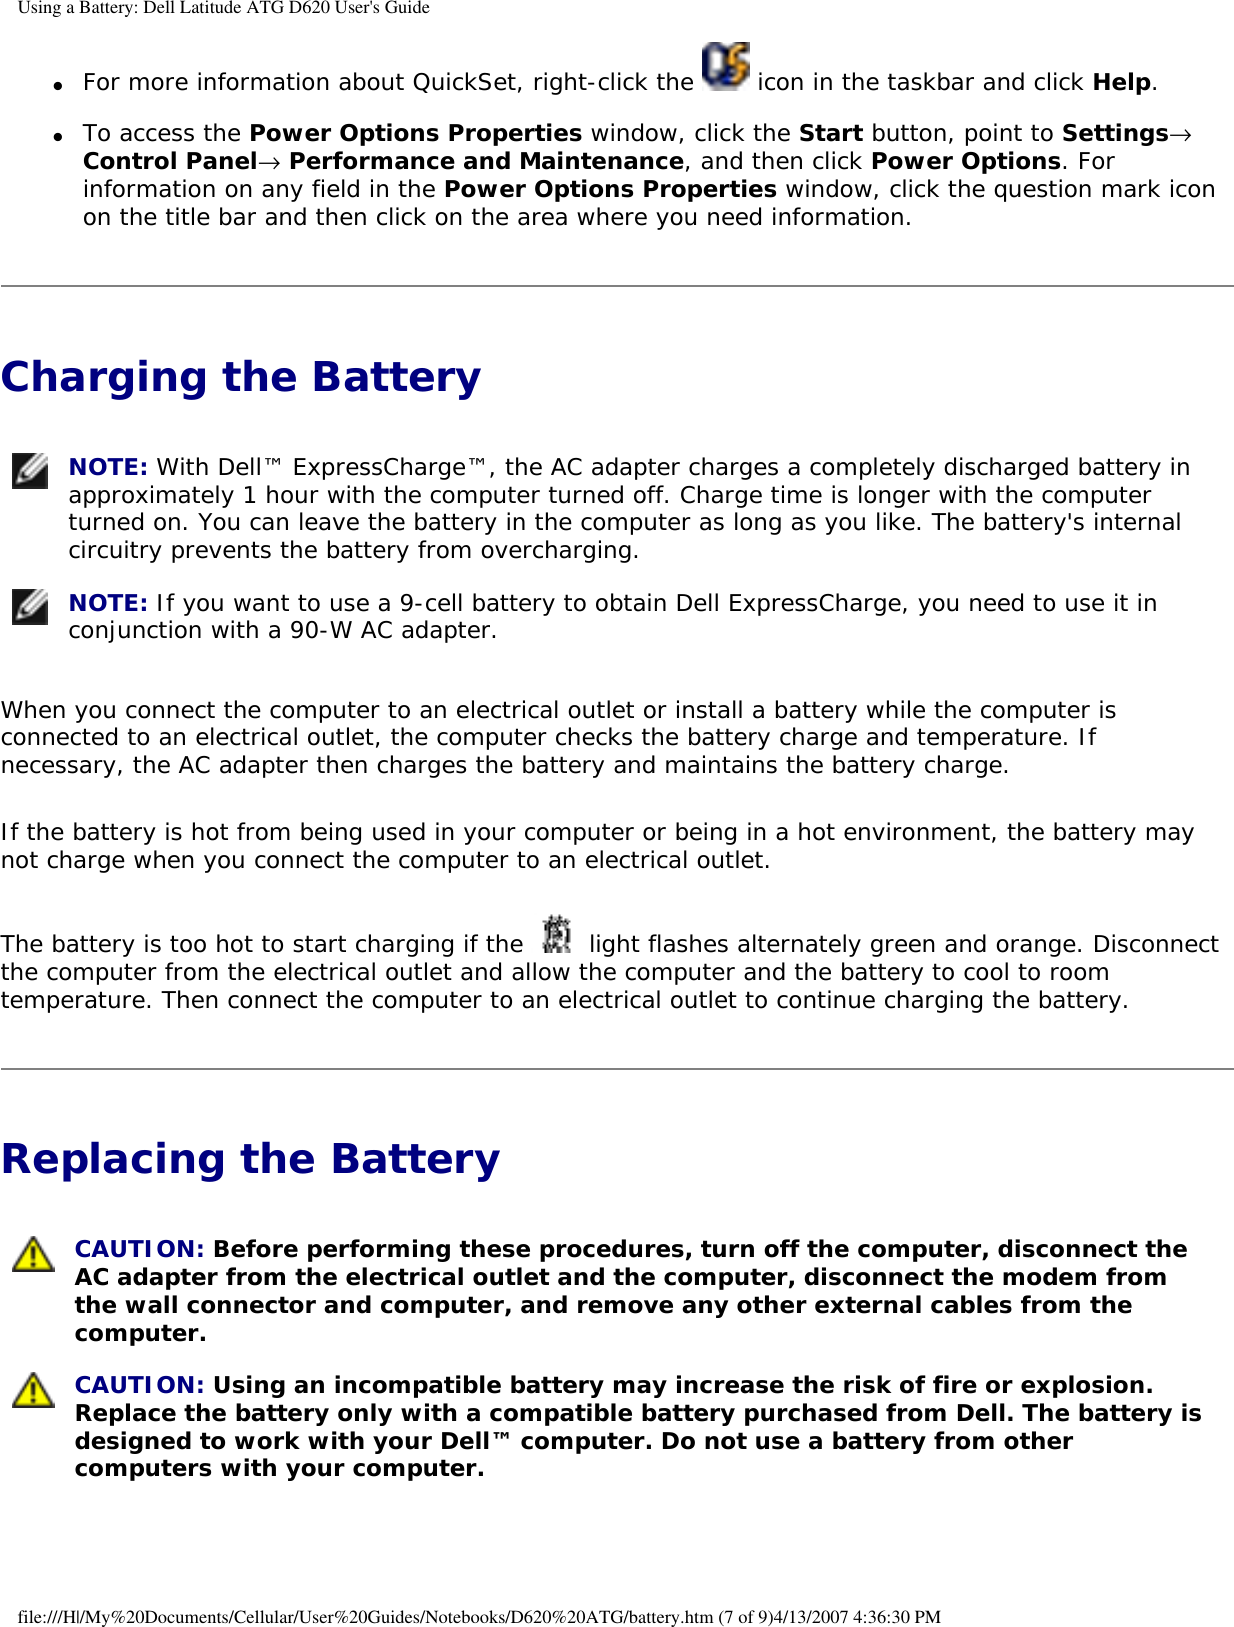 Using a Battery: Dell Latitude ATG D620 User&apos;s Guide●     For more information about QuickSet, right-click the   icon in the taskbar and click Help.  ●     To access the Power Options Properties window, click the Start button, point to Settings→ Control Panel→ Performance and Maintenance, and then click Power Options. For information on any field in the Power Options Properties window, click the question mark icon on the title bar and then click on the area where you need information.  Charging the Battery  NOTE: With Dell™ ExpressCharge™, the AC adapter charges a completely discharged battery in approximately 1 hour with the computer turned off. Charge time is longer with the computer turned on. You can leave the battery in the computer as long as you like. The battery&apos;s internal circuitry prevents the battery from overcharging.  NOTE: If you want to use a 9-cell battery to obtain Dell ExpressCharge, you need to use it in conjunction with a 90-W AC adapter. When you connect the computer to an electrical outlet or install a battery while the computer is connected to an electrical outlet, the computer checks the battery charge and temperature. If necessary, the AC adapter then charges the battery and maintains the battery charge.If the battery is hot from being used in your computer or being in a hot environment, the battery may not charge when you connect the computer to an electrical outlet.The battery is too hot to start charging if the   light flashes alternately green and orange. Disconnect the computer from the electrical outlet and allow the computer and the battery to cool to room temperature. Then connect the computer to an electrical outlet to continue charging the battery.Replacing the Battery  CAUTION: Before performing these procedures, turn off the computer, disconnect the AC adapter from the electrical outlet and the computer, disconnect the modem from the wall connector and computer, and remove any other external cables from the computer.  CAUTION: Using an incompatible battery may increase the risk of fire or explosion. Replace the battery only with a compatible battery purchased from Dell. The battery is designed to work with your Dell™ computer. Do not use a battery from other computers with your computer. file:///H|/My%20Documents/Cellular/User%20Guides/Notebooks/D620%20ATG/battery.htm (7 of 9)4/13/2007 4:36:30 PM